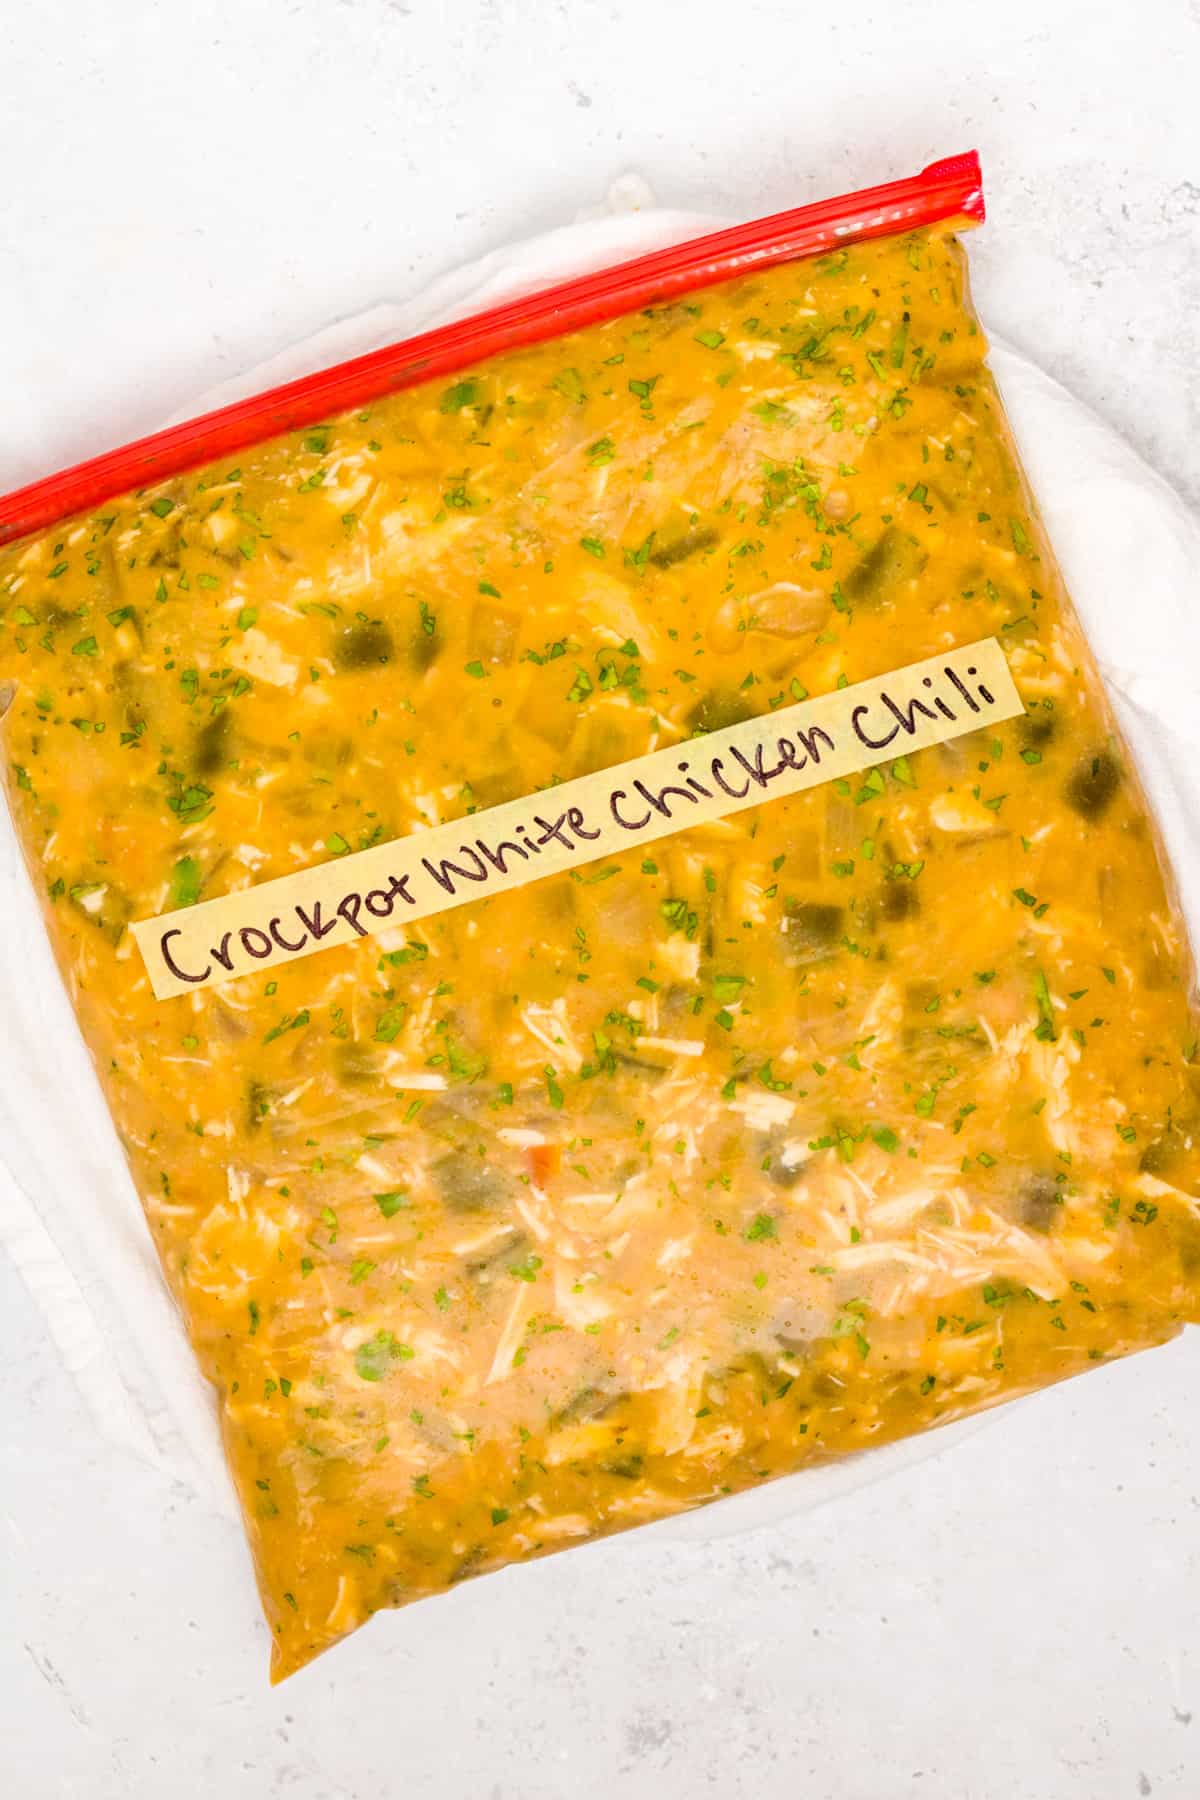 Crockpot white chicken chili in a freezer bag and labeled.